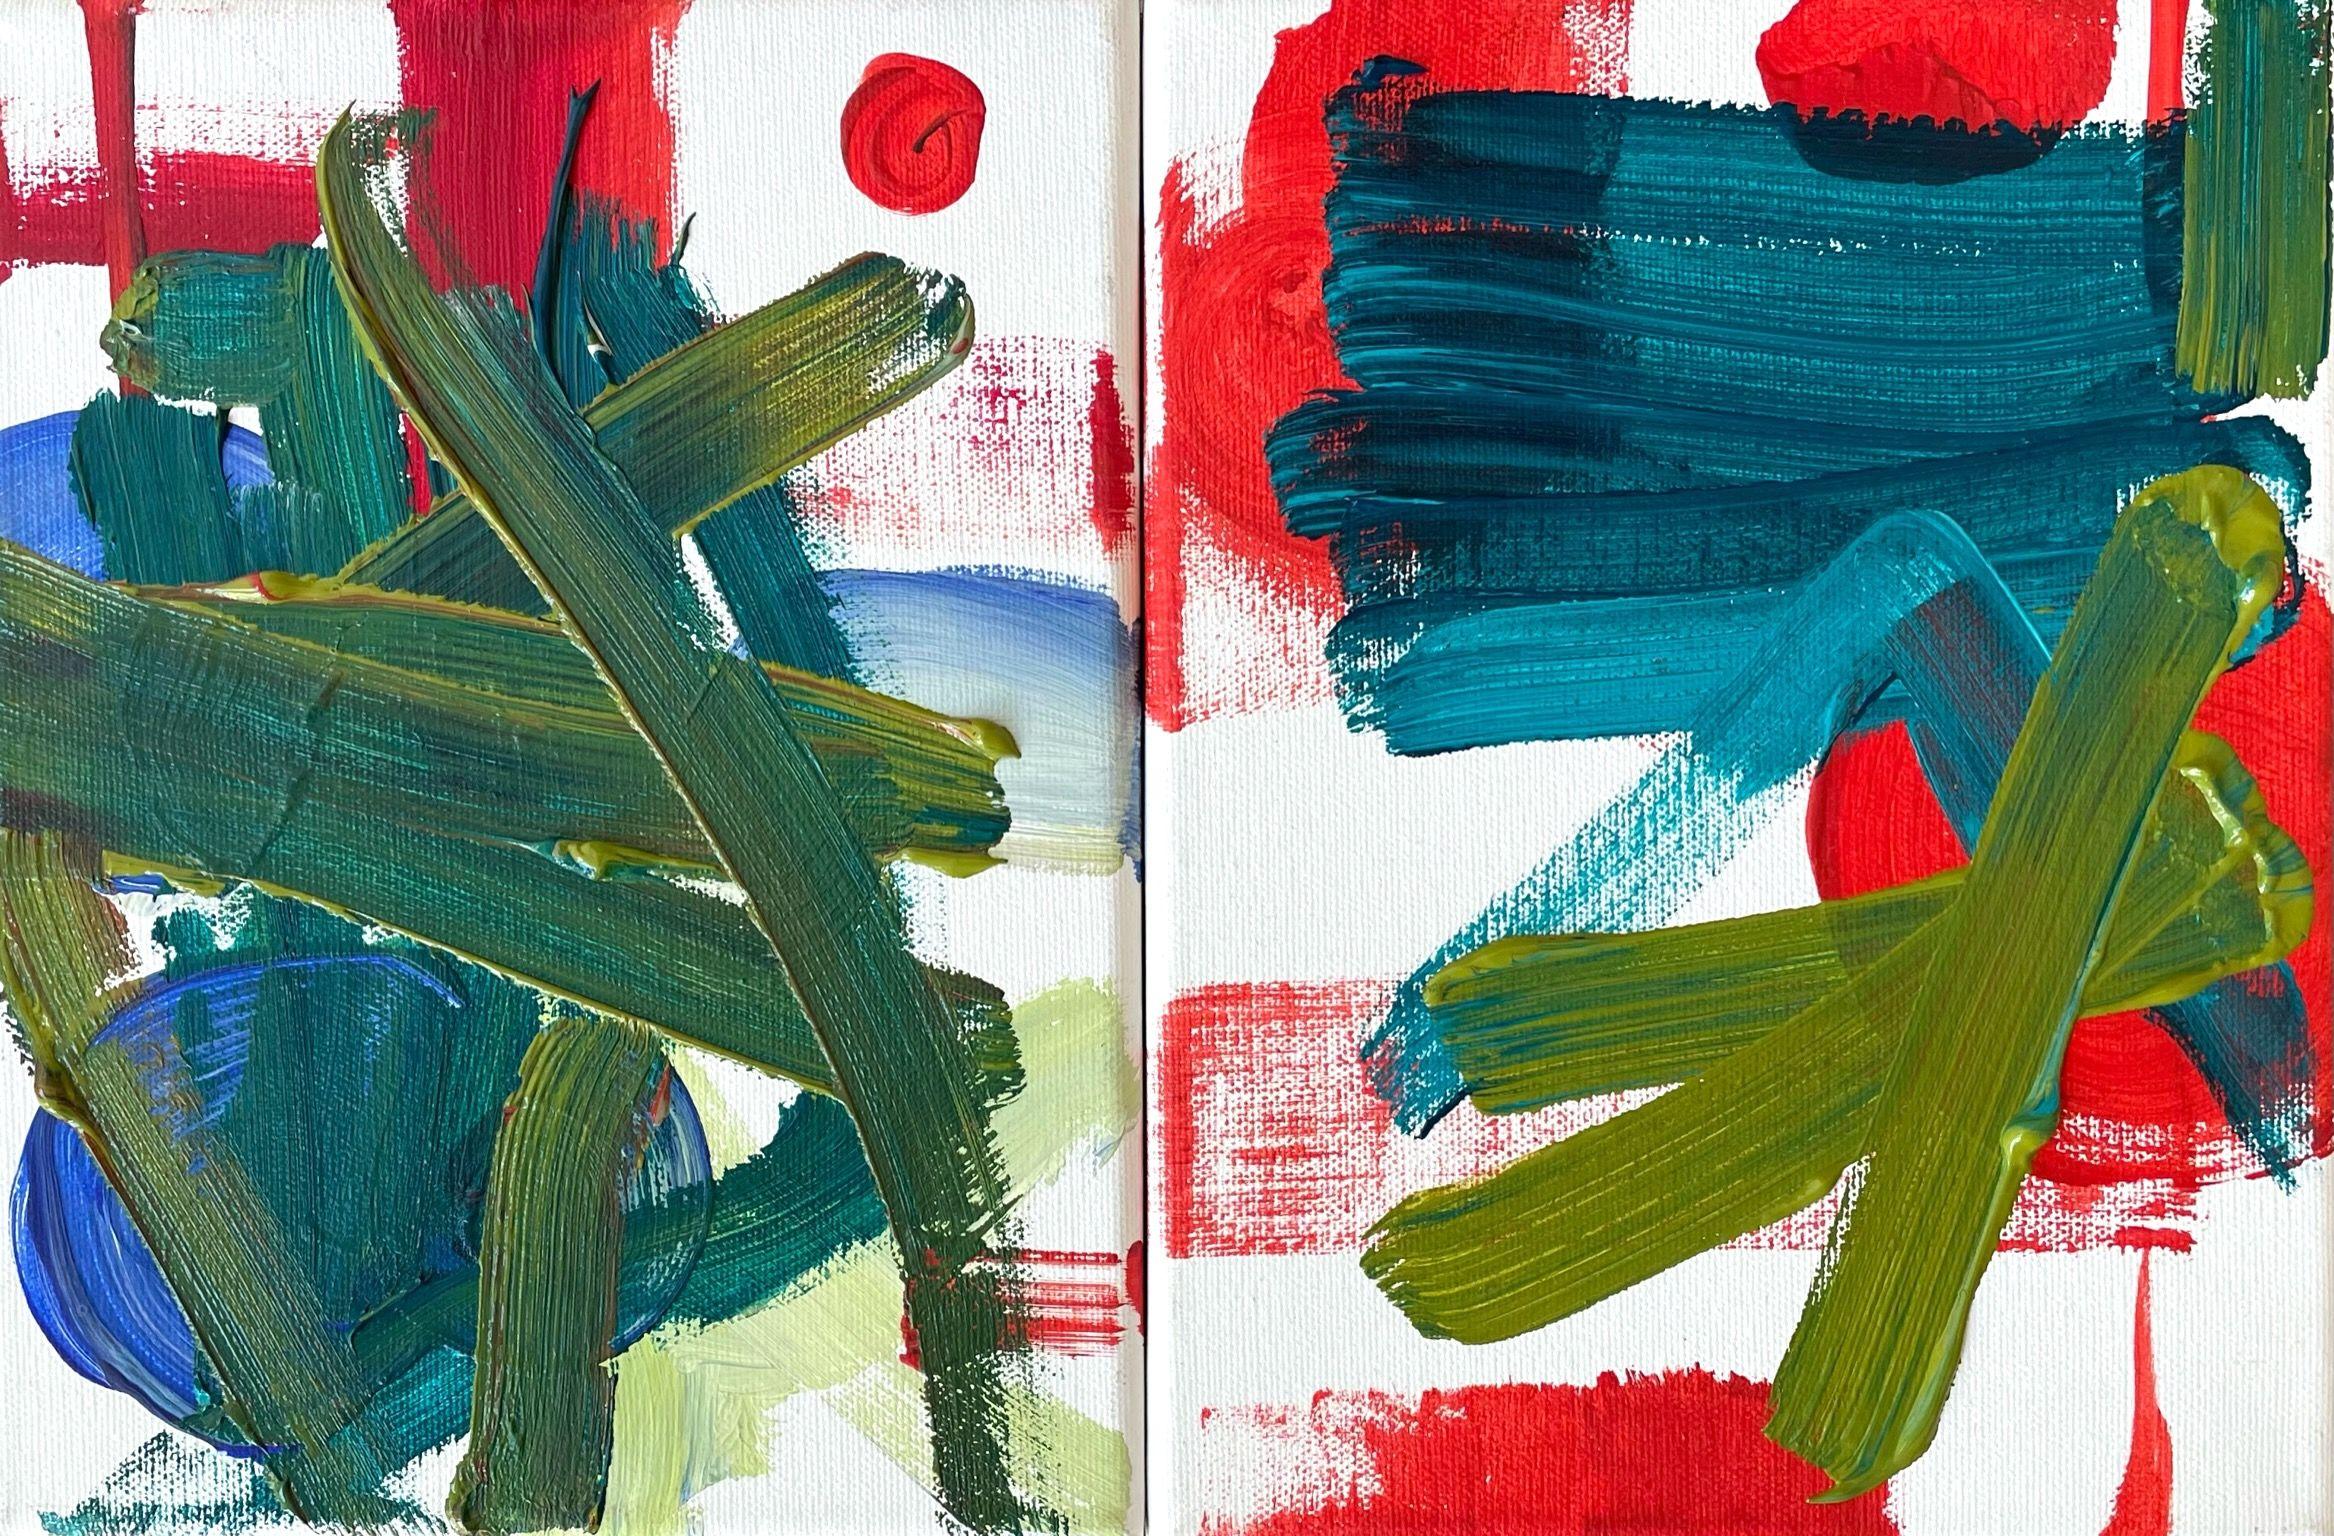 "From time to time (diptych)" is an abstract diptych on canvas. It is painted with thick brushstrokes, very dynamic and expressive. The main colors are green, blue and red. The sides of the artwork are not painted.    The two paintings can be hung